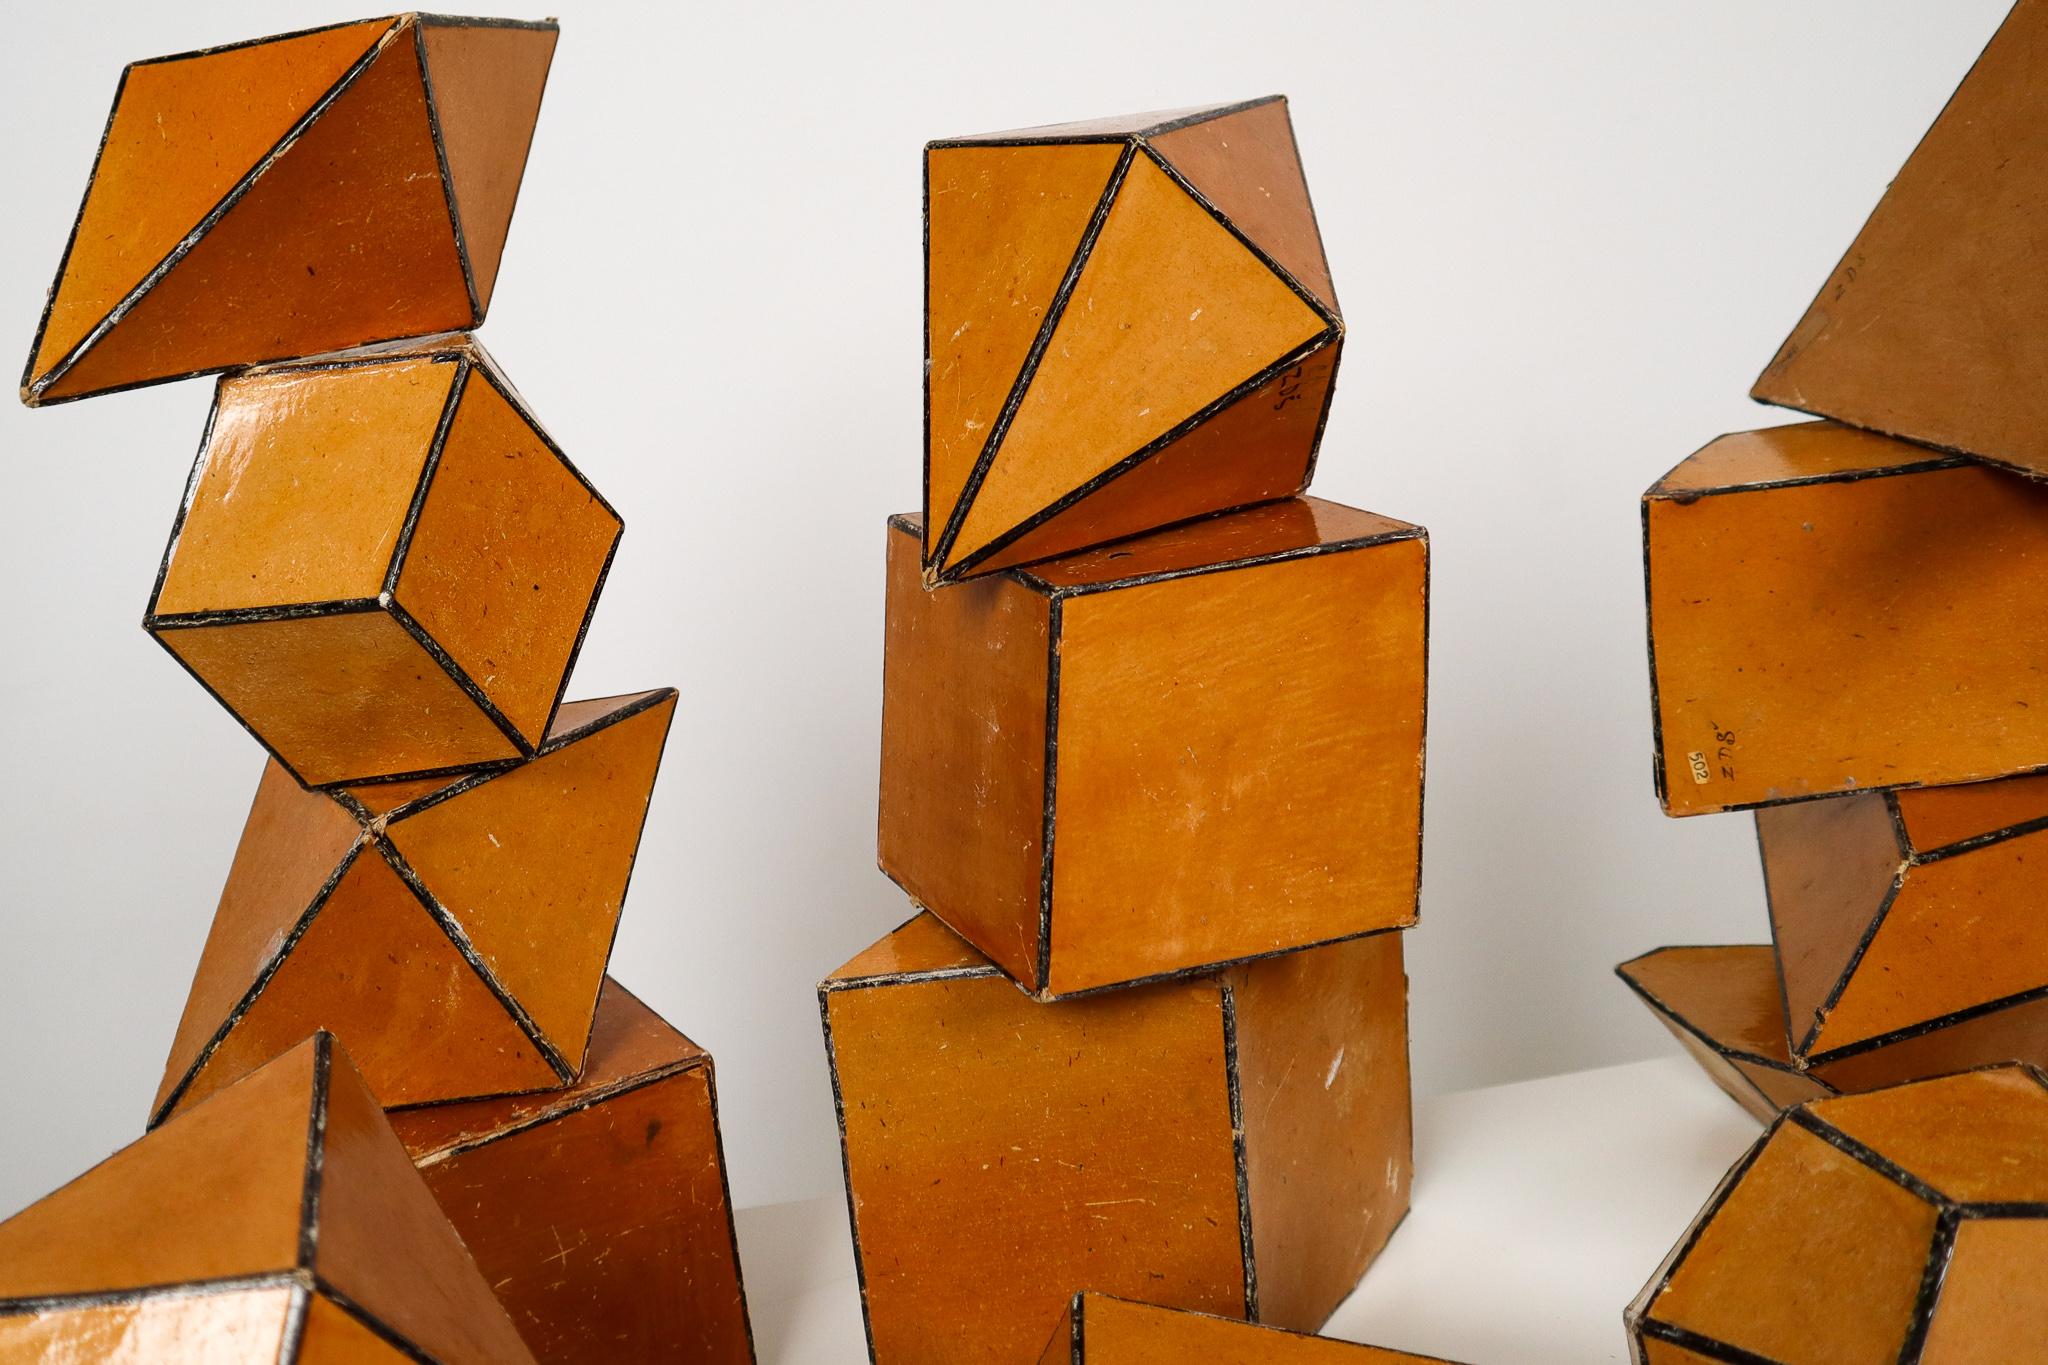 Early 20th Century Set of 24 Geometric Science Cardboard Classroom Crystal Models Praque, 1920